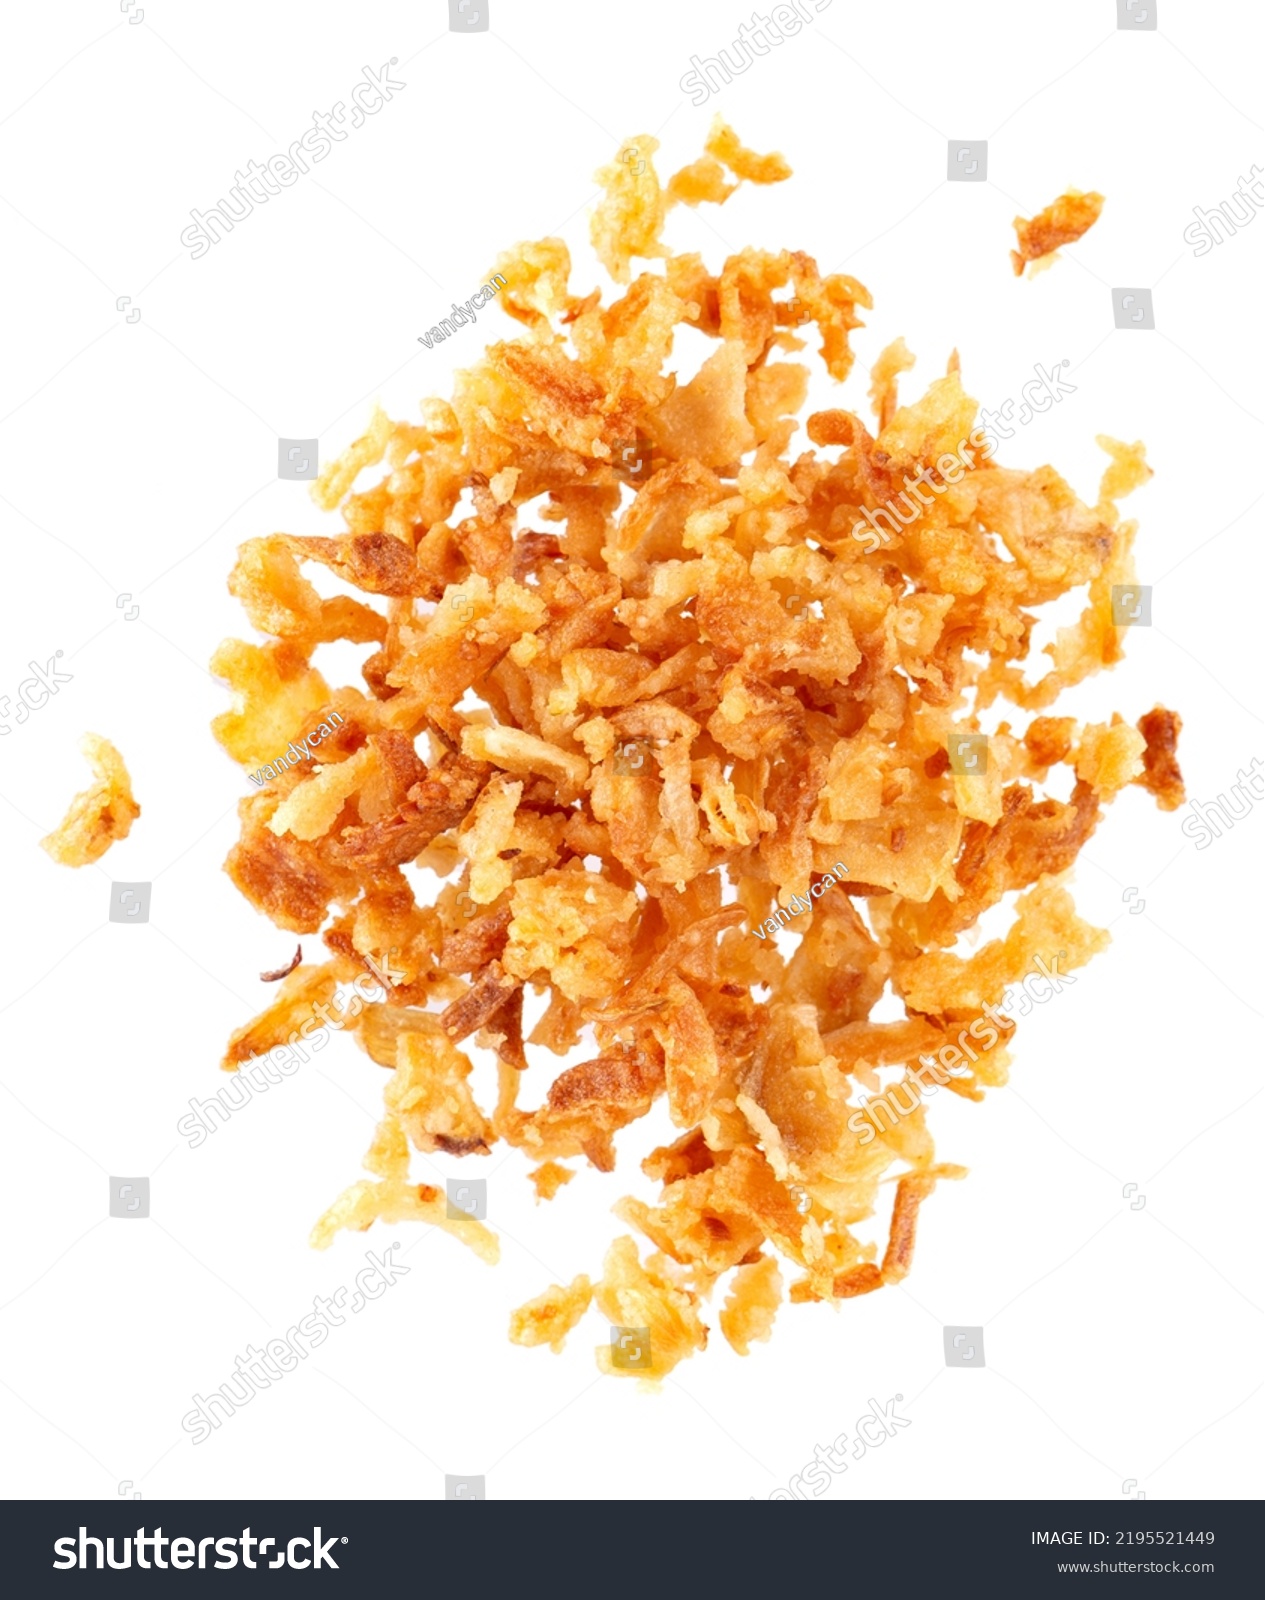 Roasted onions isolated on white background. Crispy fried onions. Top view. #2195521449